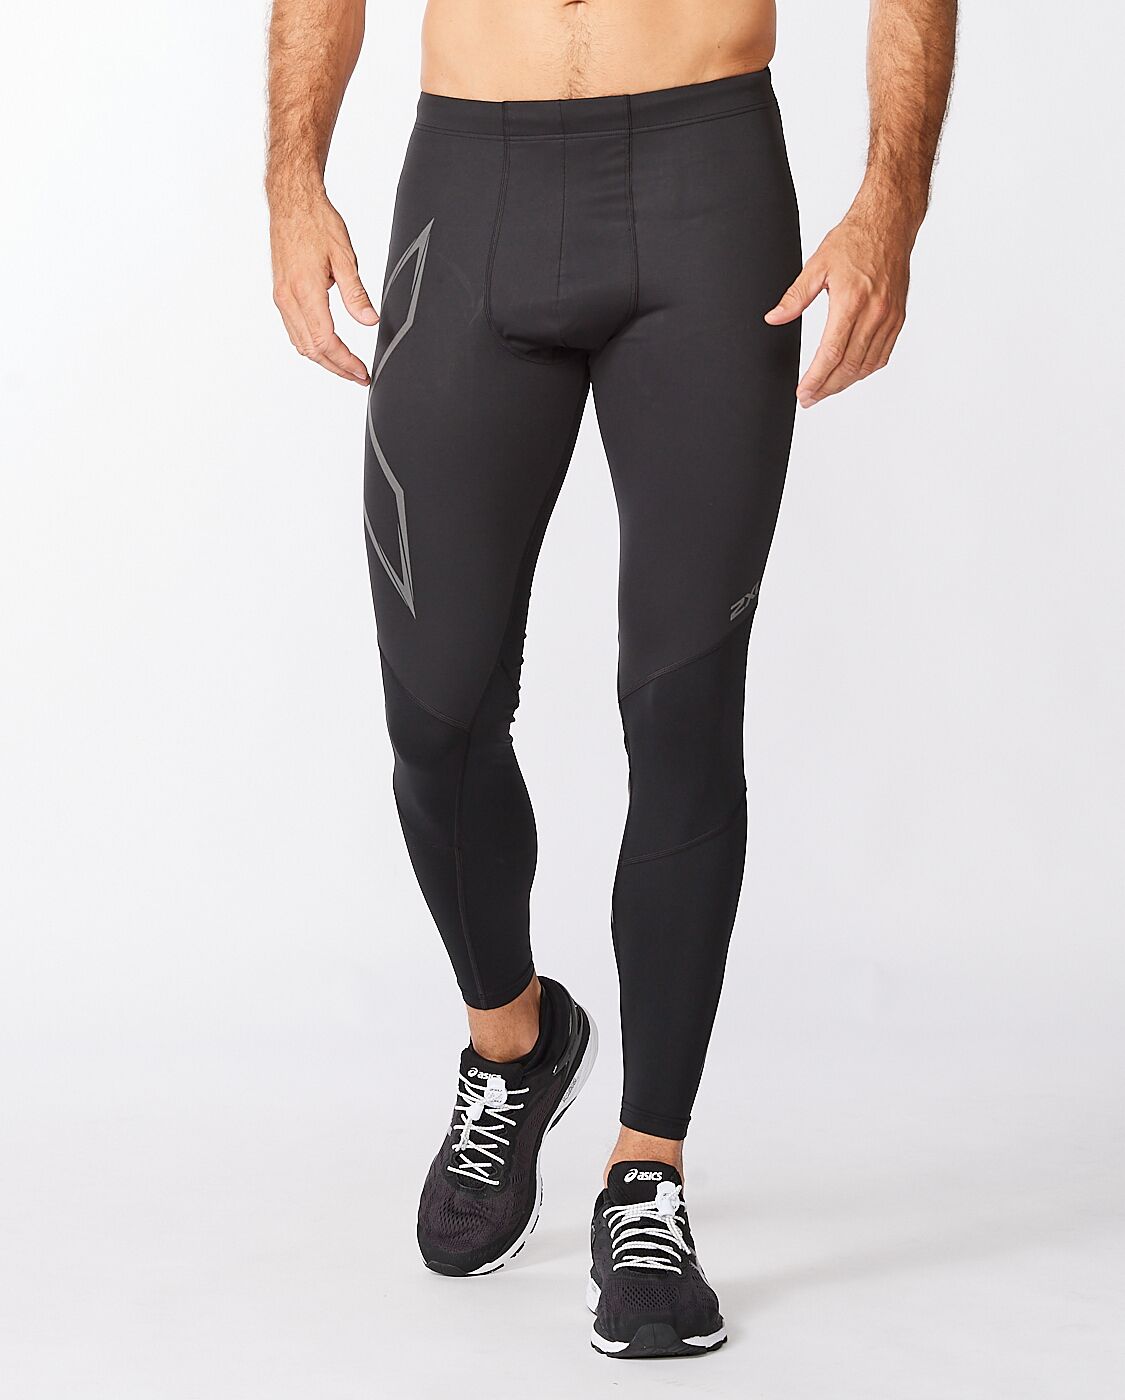 ReDesign Apparels Men's Polyester Skinny Fit Compression Pant